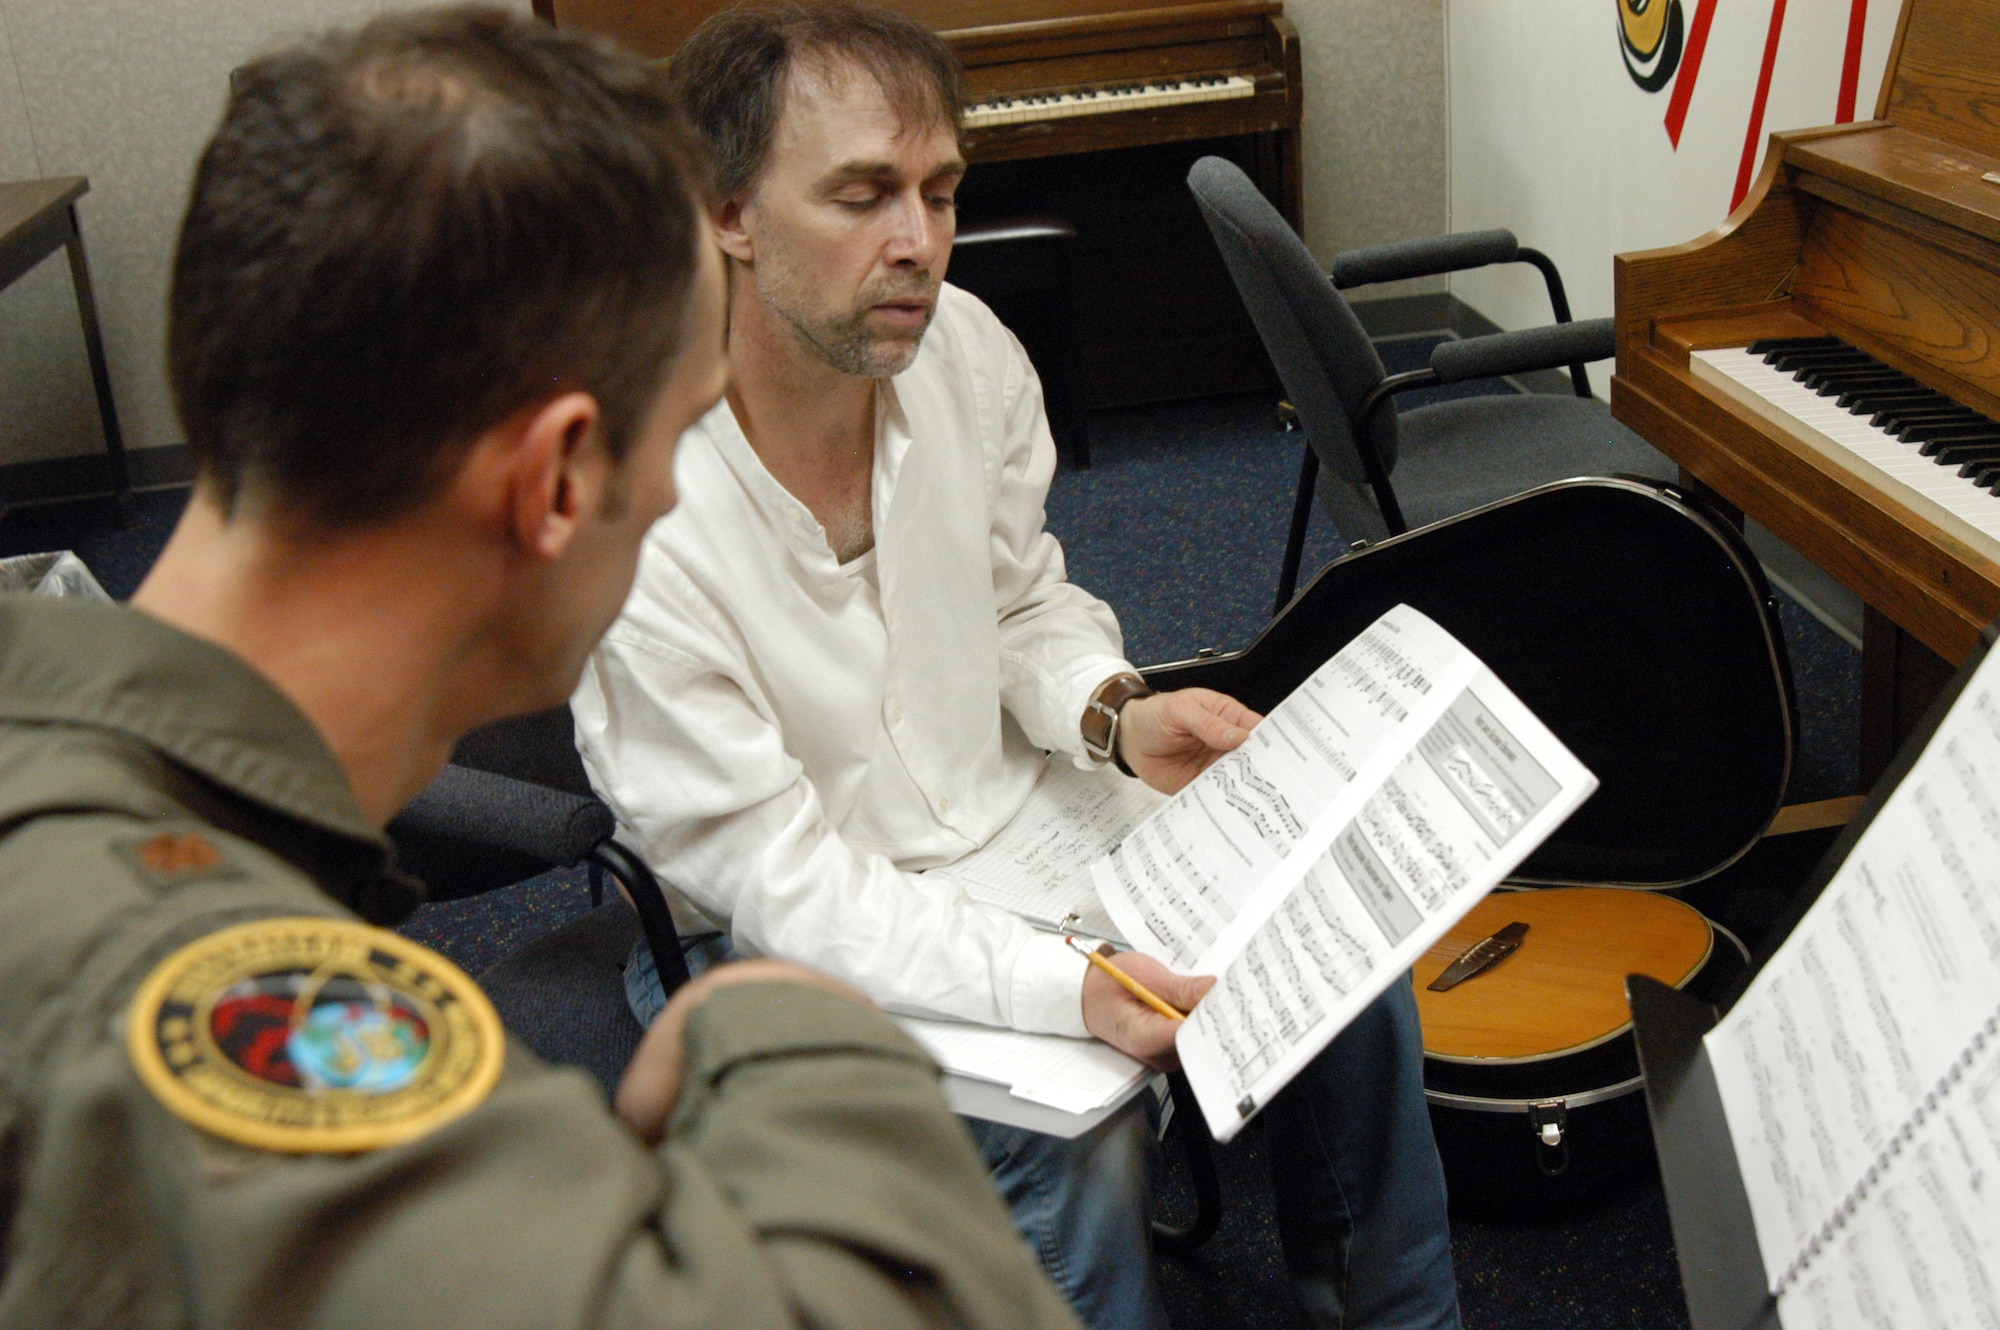 OFFUTT AIR FORCE BASE, Neb. -- Robert Whitbeck, a local musician, gives Maj. Dave Jones, United States Strategic Command, feedback on his guitar play during a lesson at the Community Activity Center here March 9. Mr. Whitbeck has been teaching guitar lessons at the center since 2008 and said he enjoys teaching the Offutt community. U.S. Air Force photo by Staff Sgt. James M. Hodgman (Released)